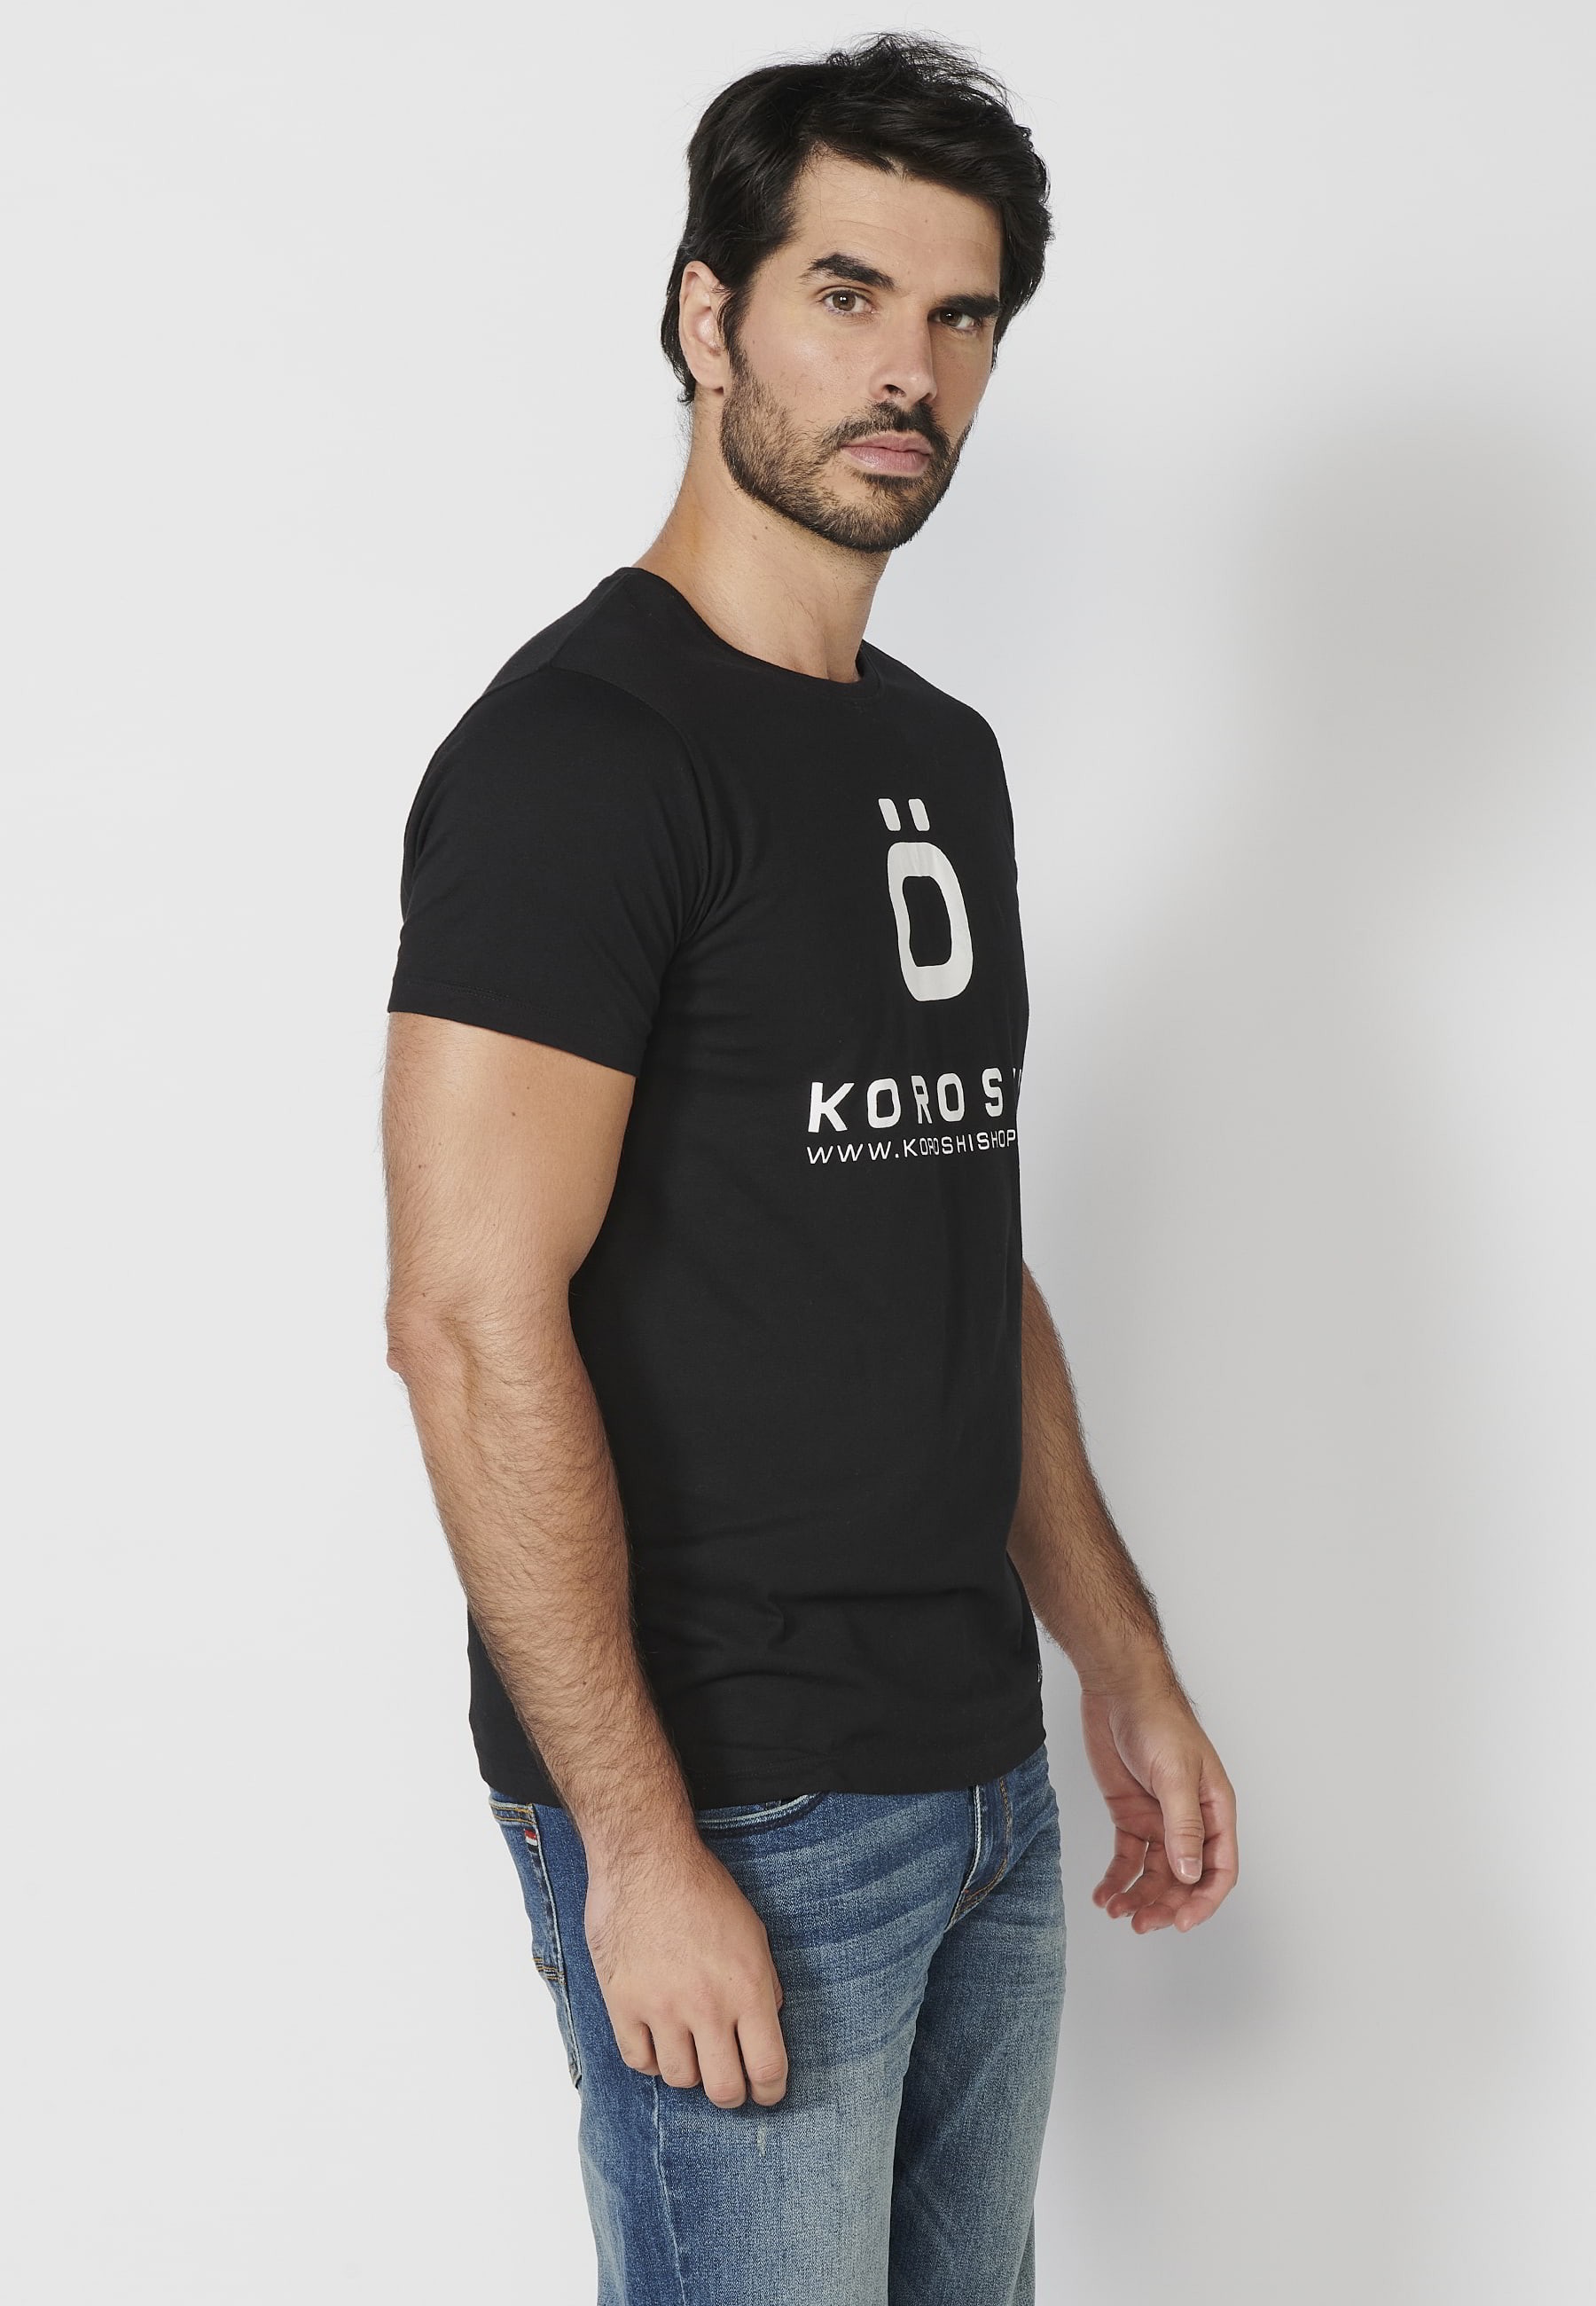 Short-sleeved Cotton T-shirt with front logo in Black color for Men